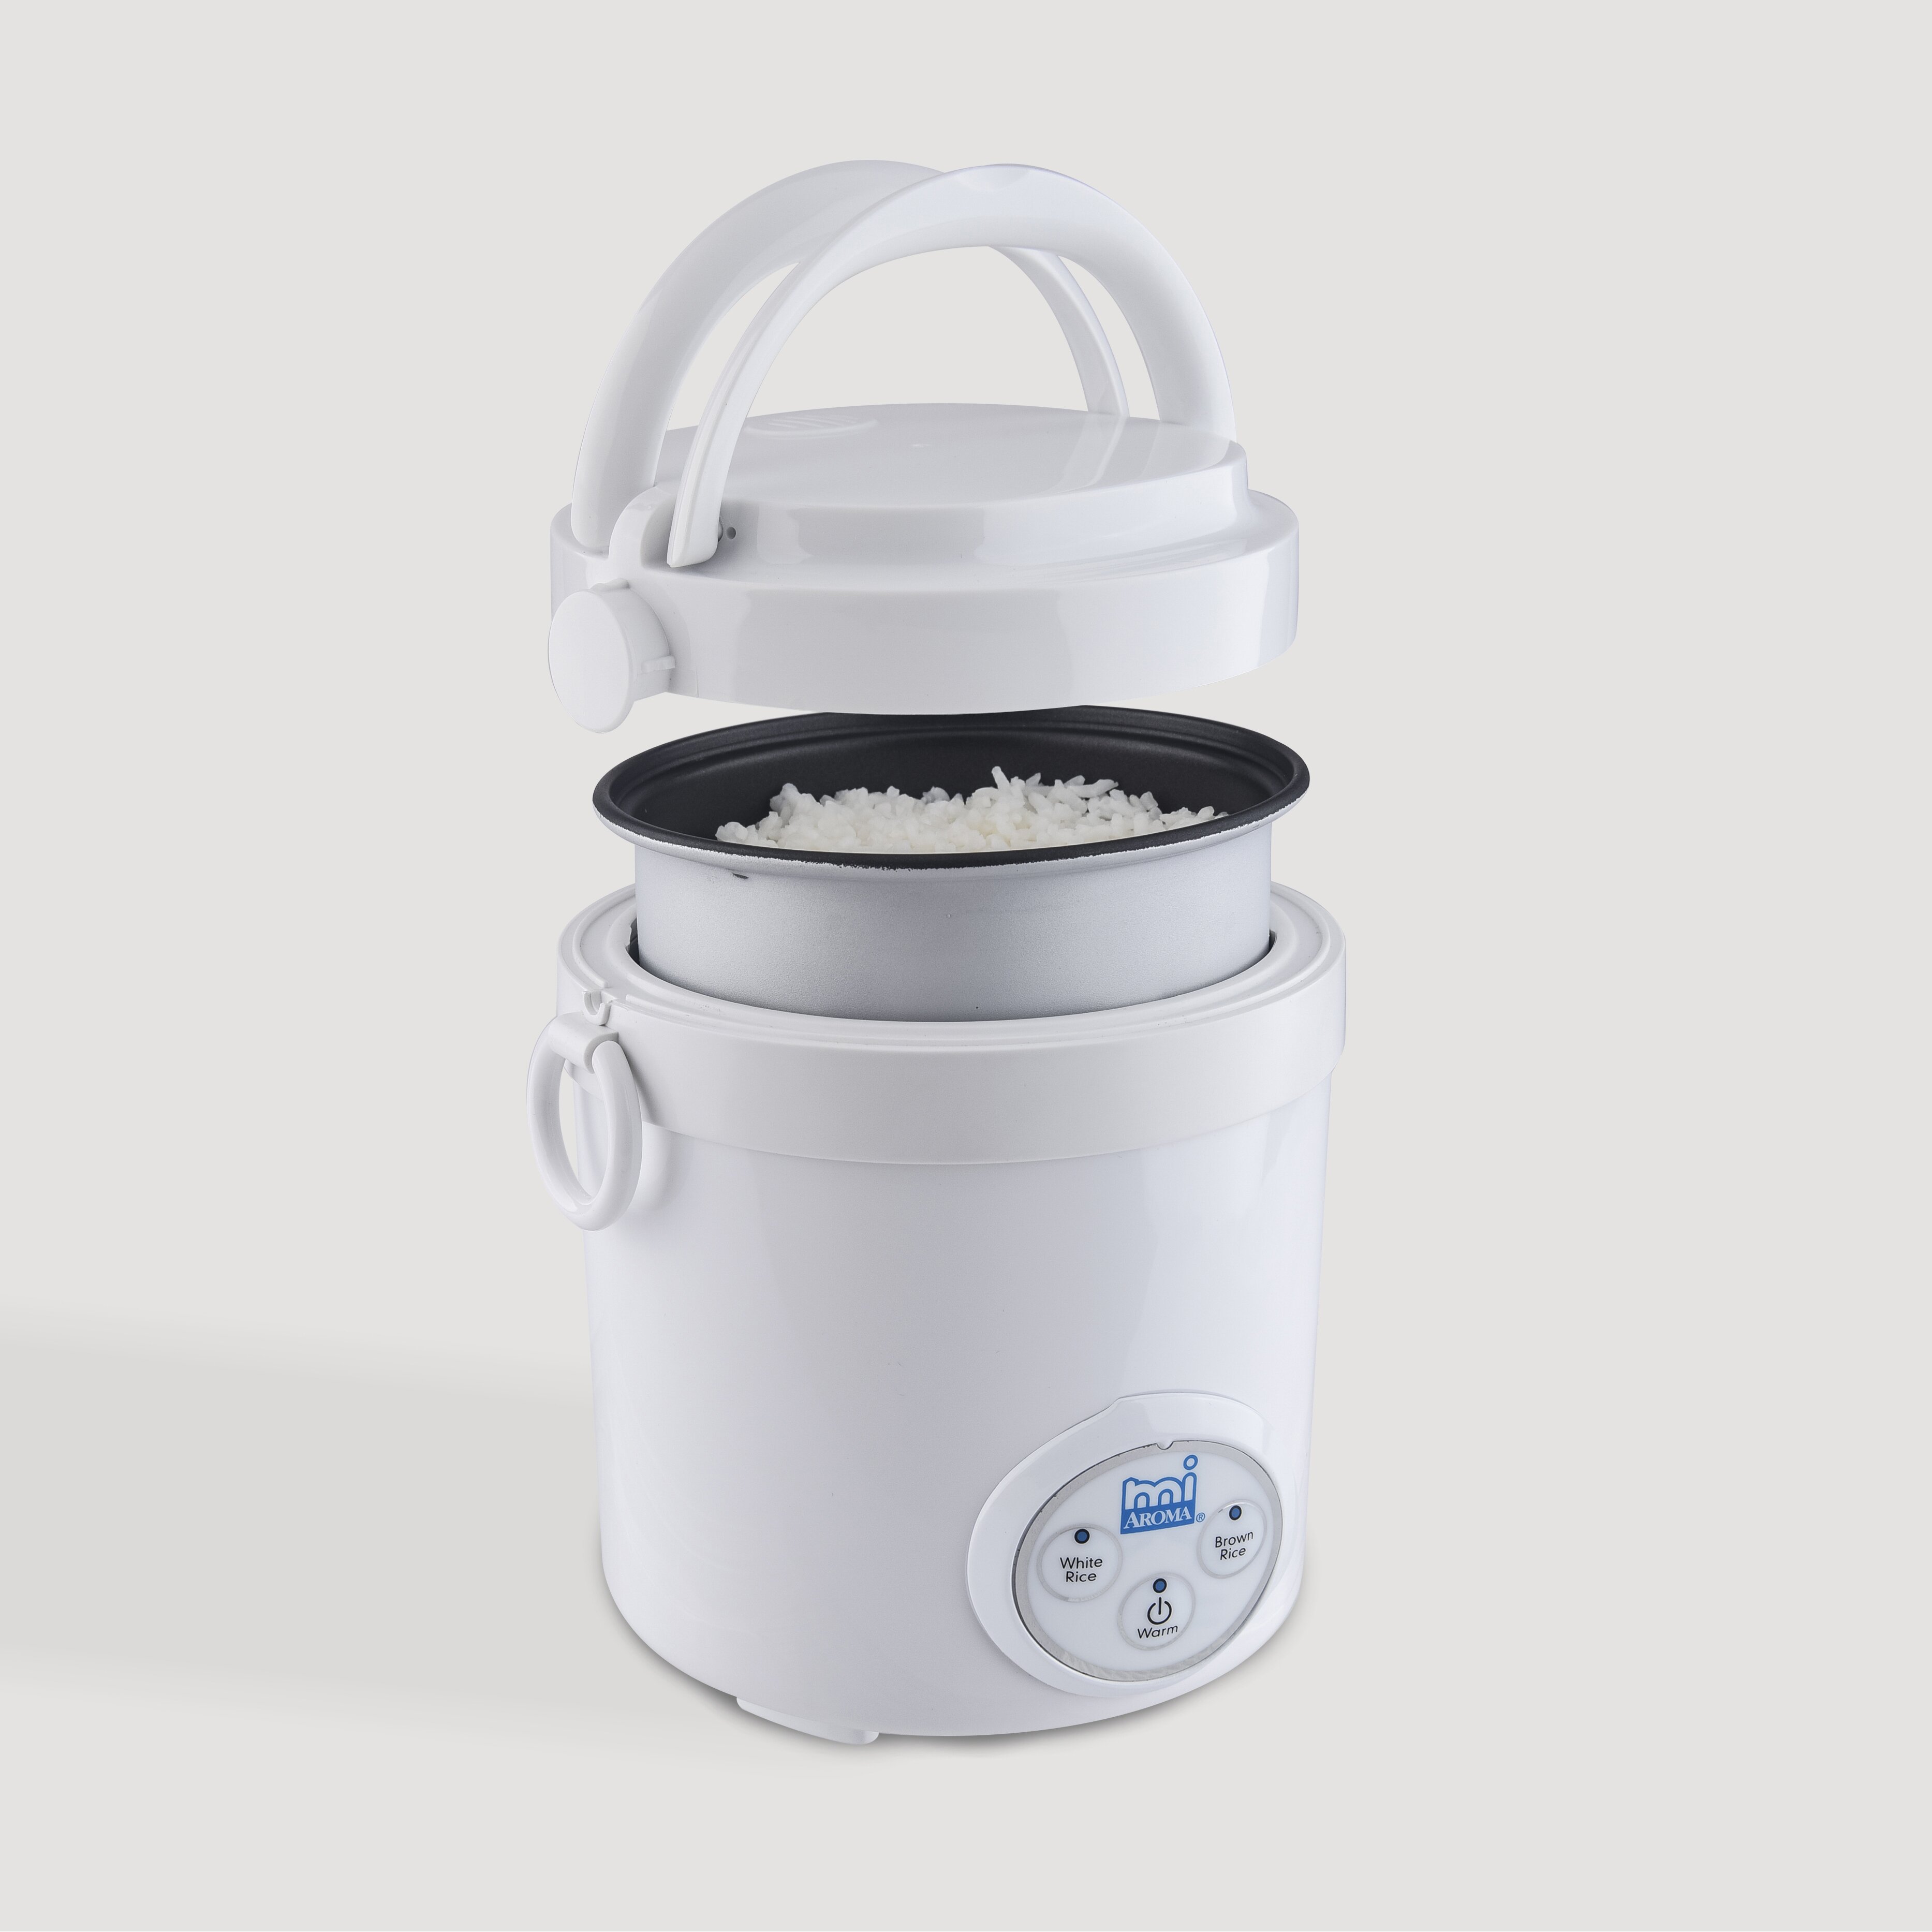 Aroma 3-Cup Digital Cool Touch Rice Cooker | Wayfair